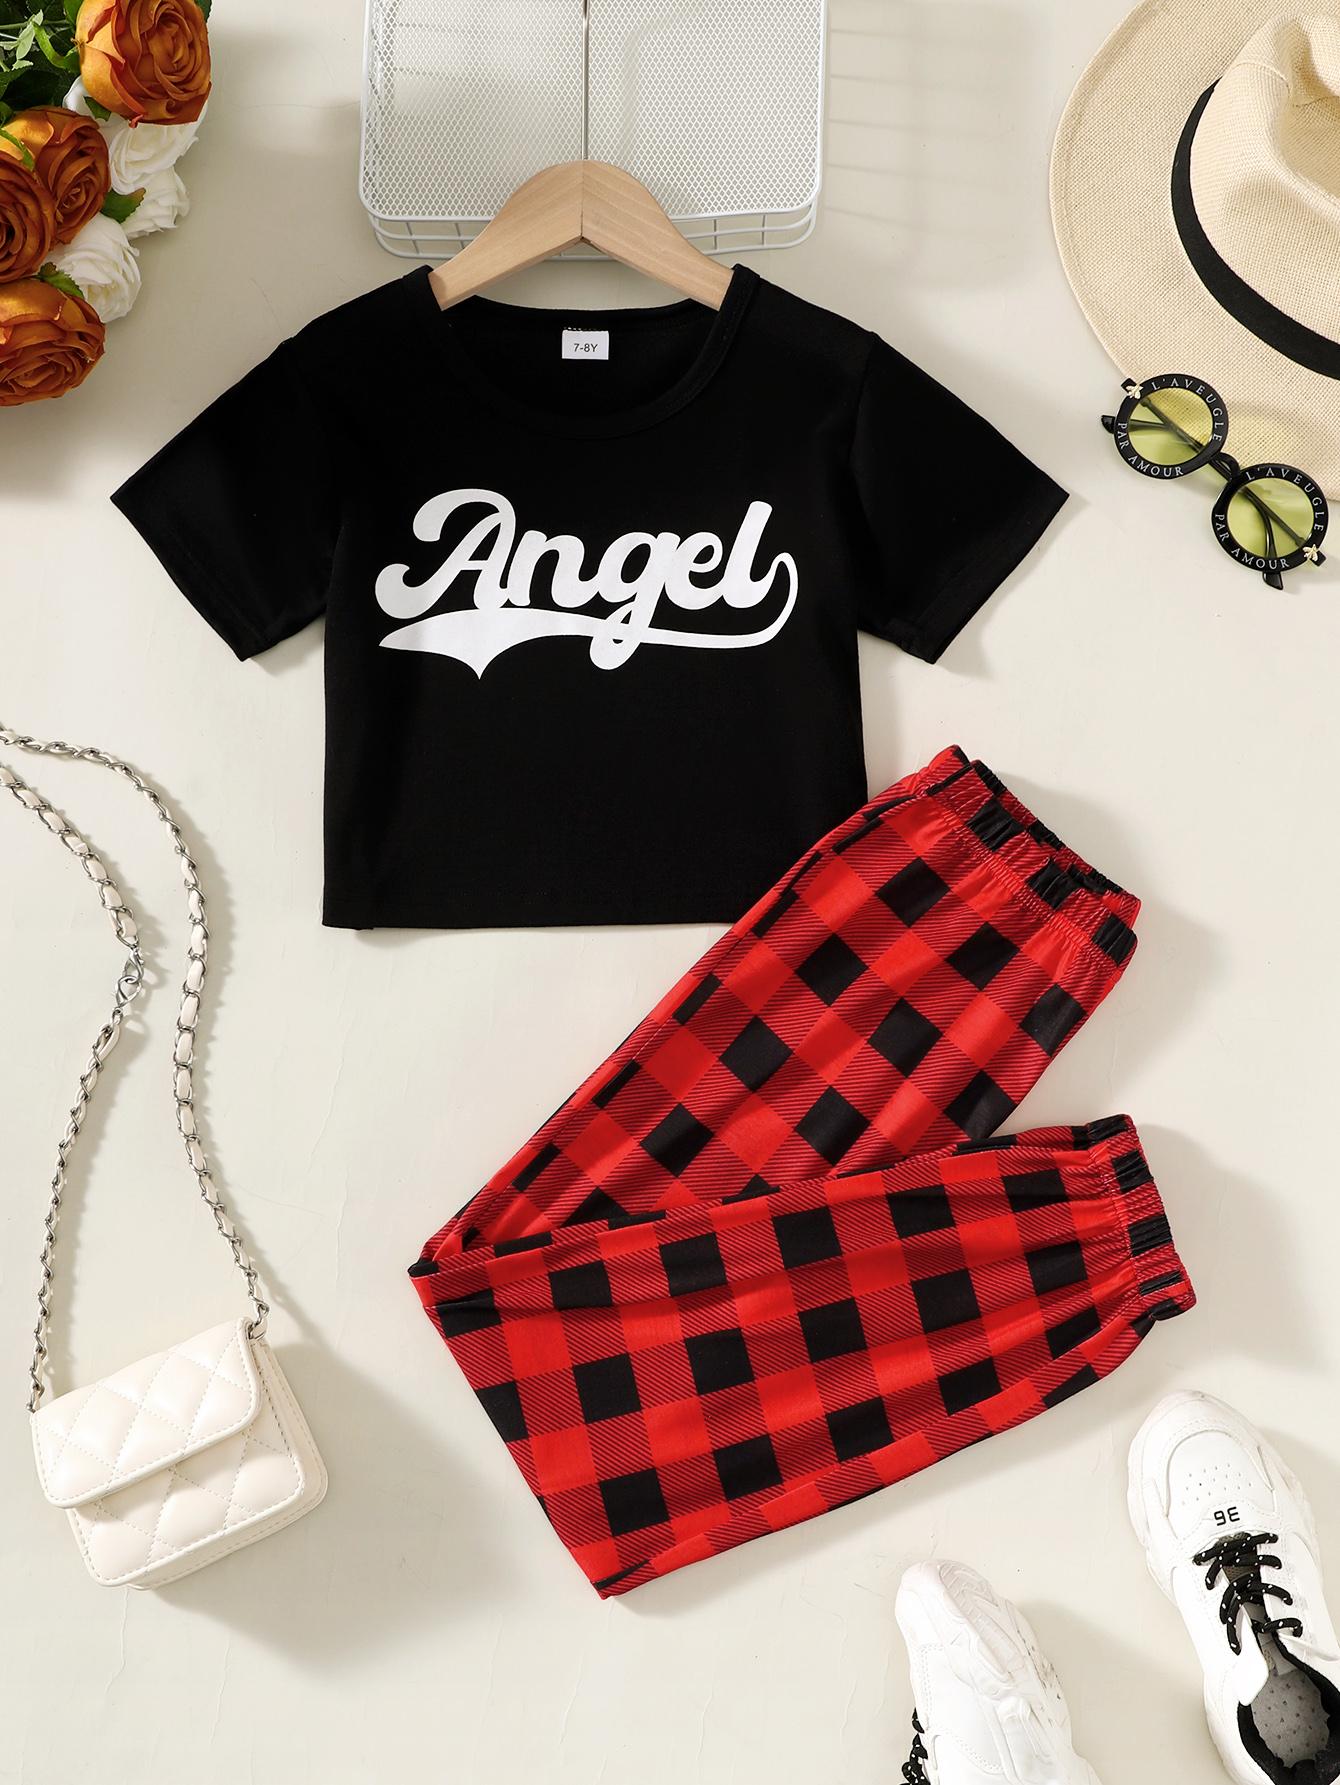 7-14Y Ready Stock Kid Girls Pants Sets "Angel" Letter Print Short Sleeve T-shirt Elastic Plaid Trousers 2Pcs Spring Fall Clothing From 7Y-14Y Red Catpapa 462312012